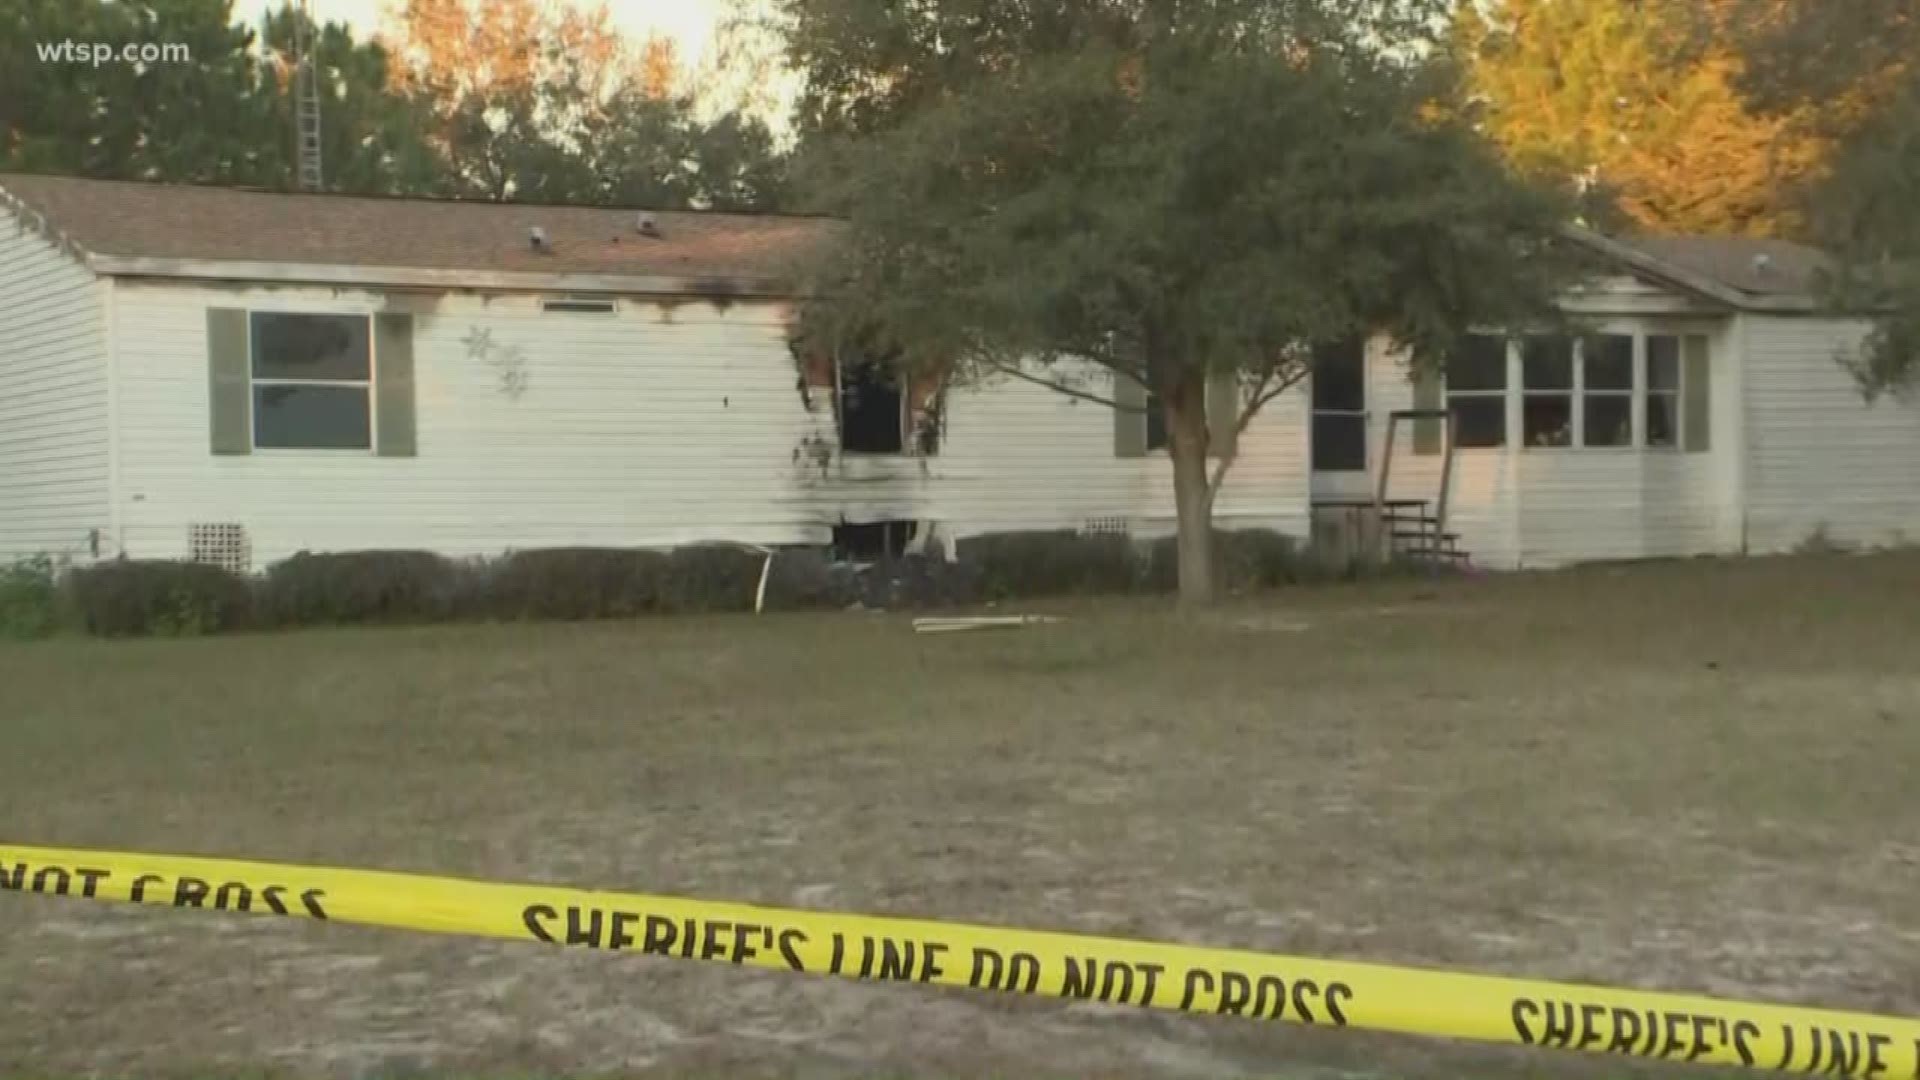 A grandfather and his 5-year-old grandson died from their injuries, and several dogs were killed, in a house fire late Friday, according to Pasco County Fire Rescue.